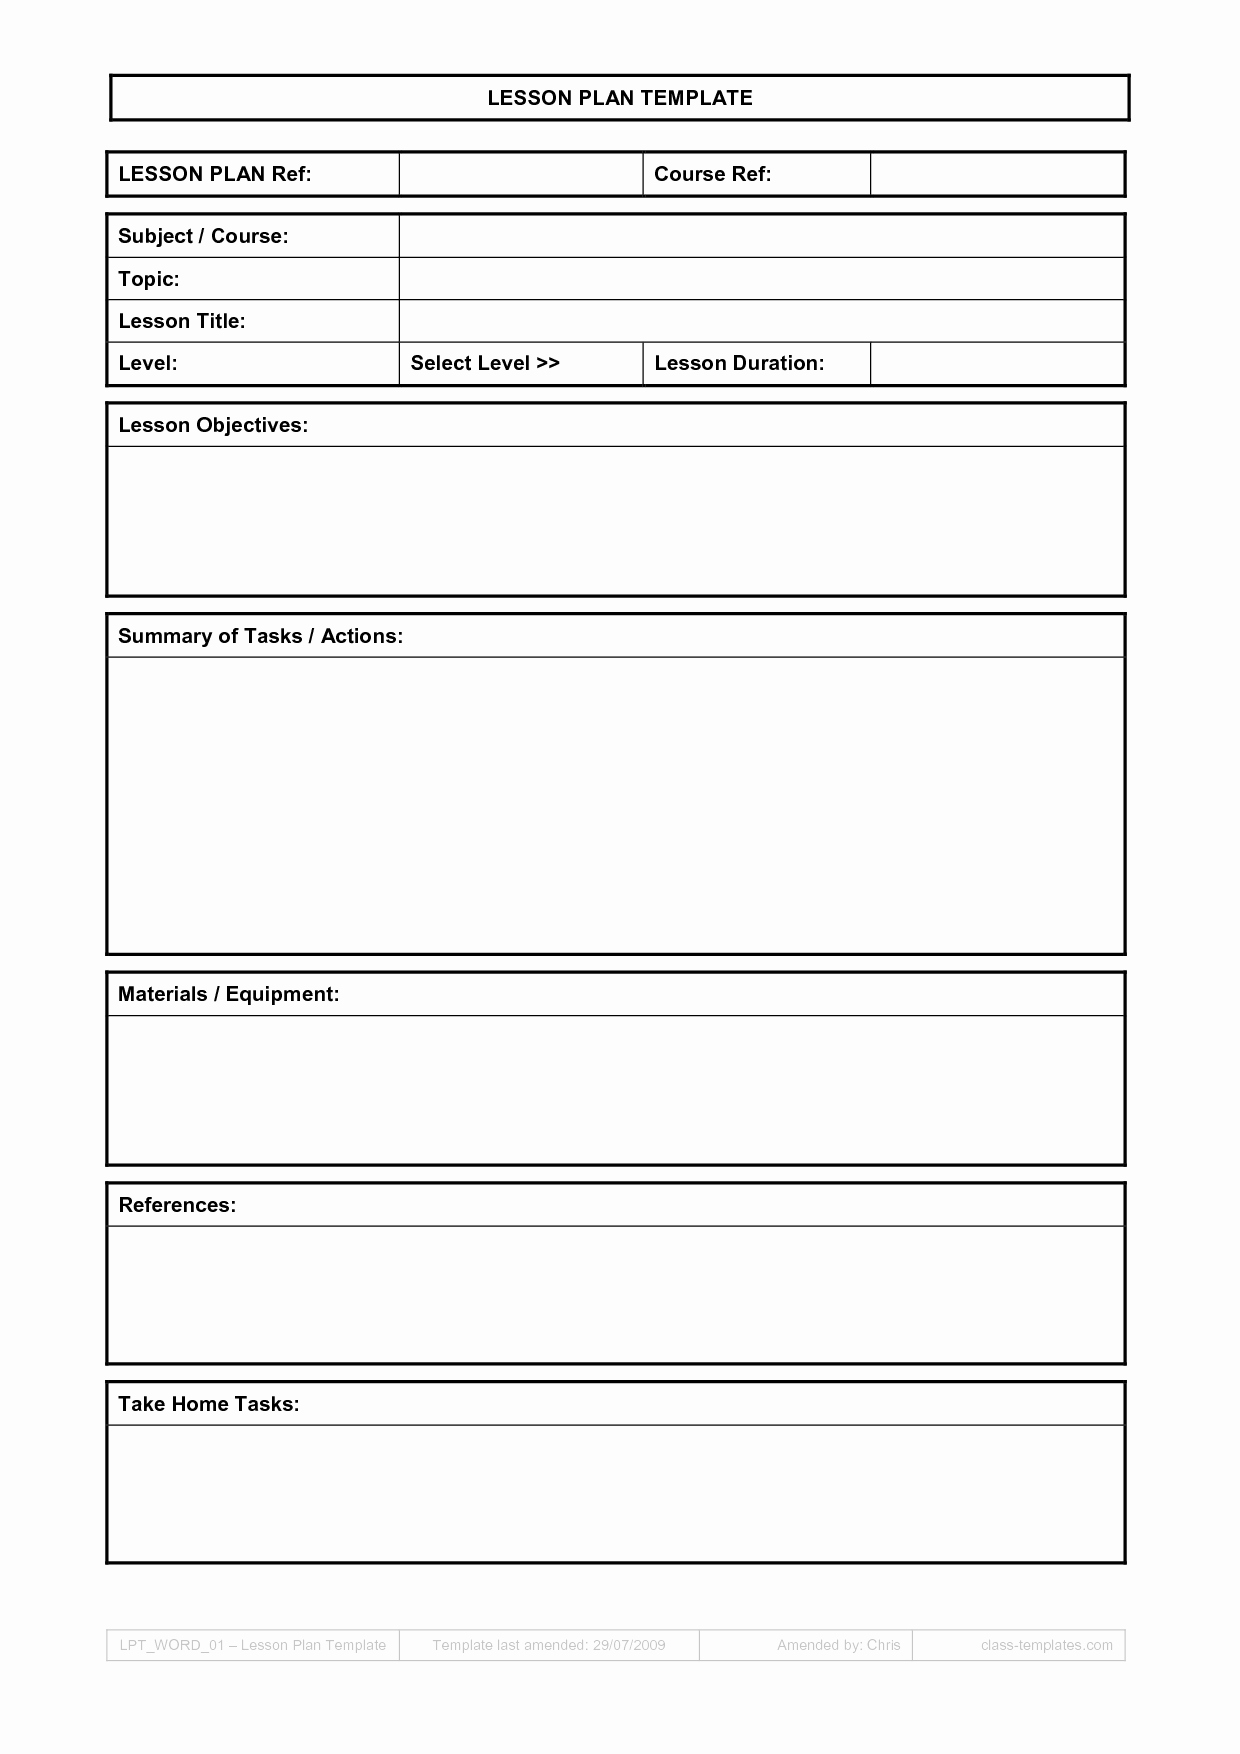 Sub Lesson Plan Template Best Of Lesson Plan Template Free Pic Twiroo